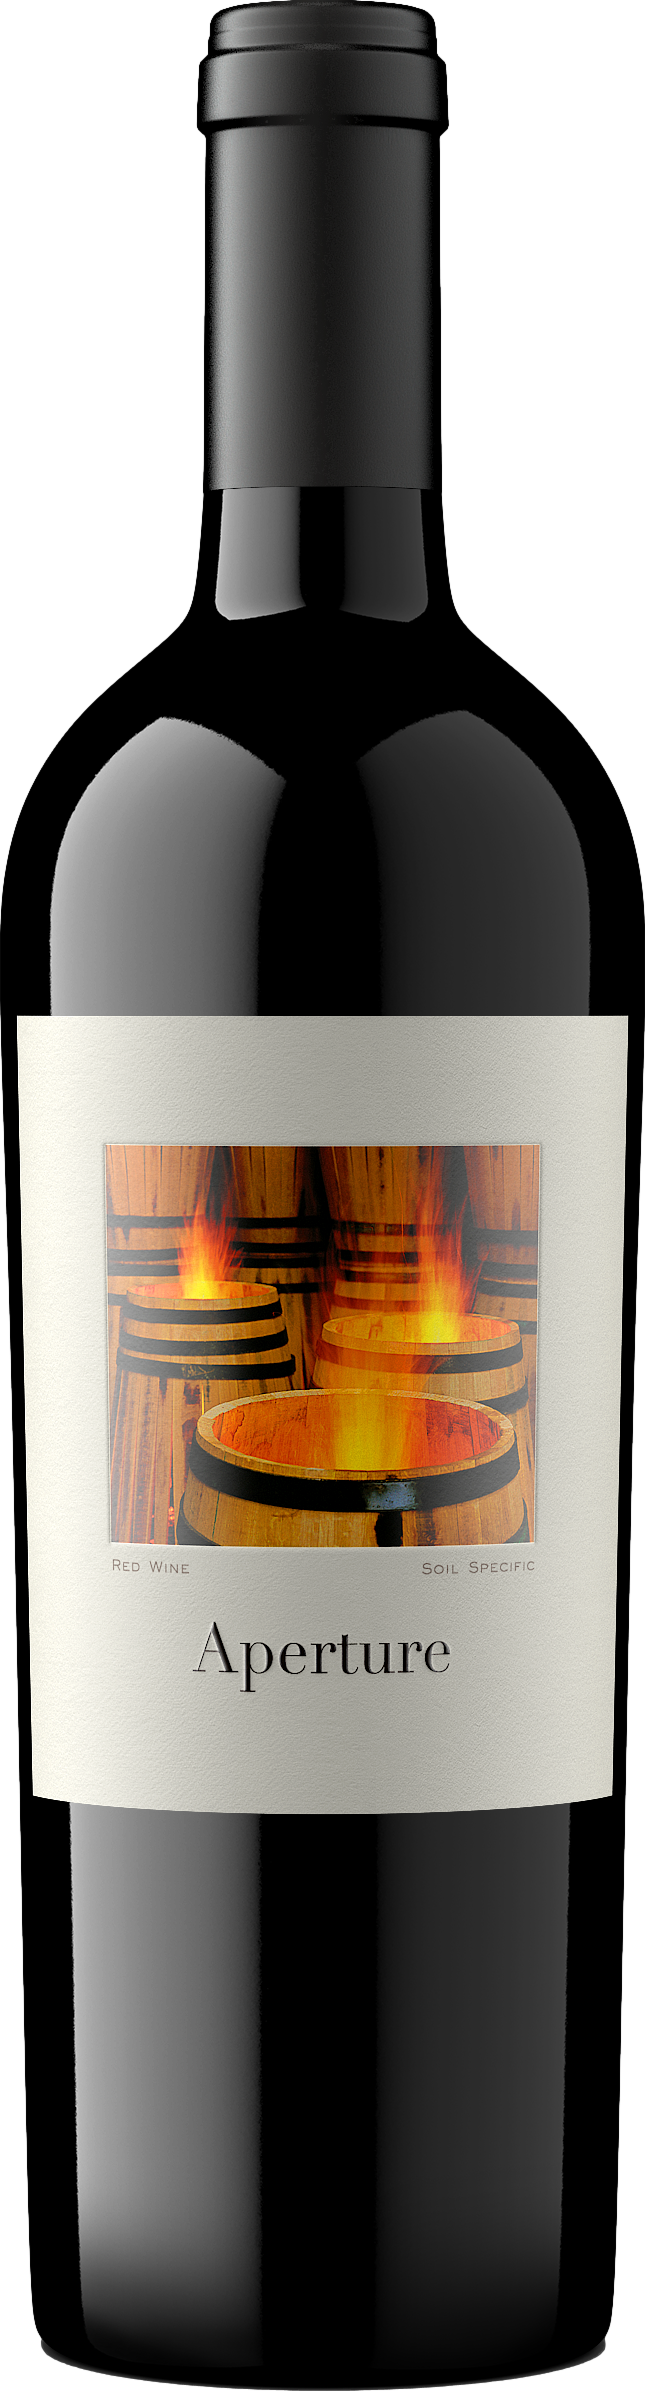 Product image of Aperture Red Blend 2017 from 8wines